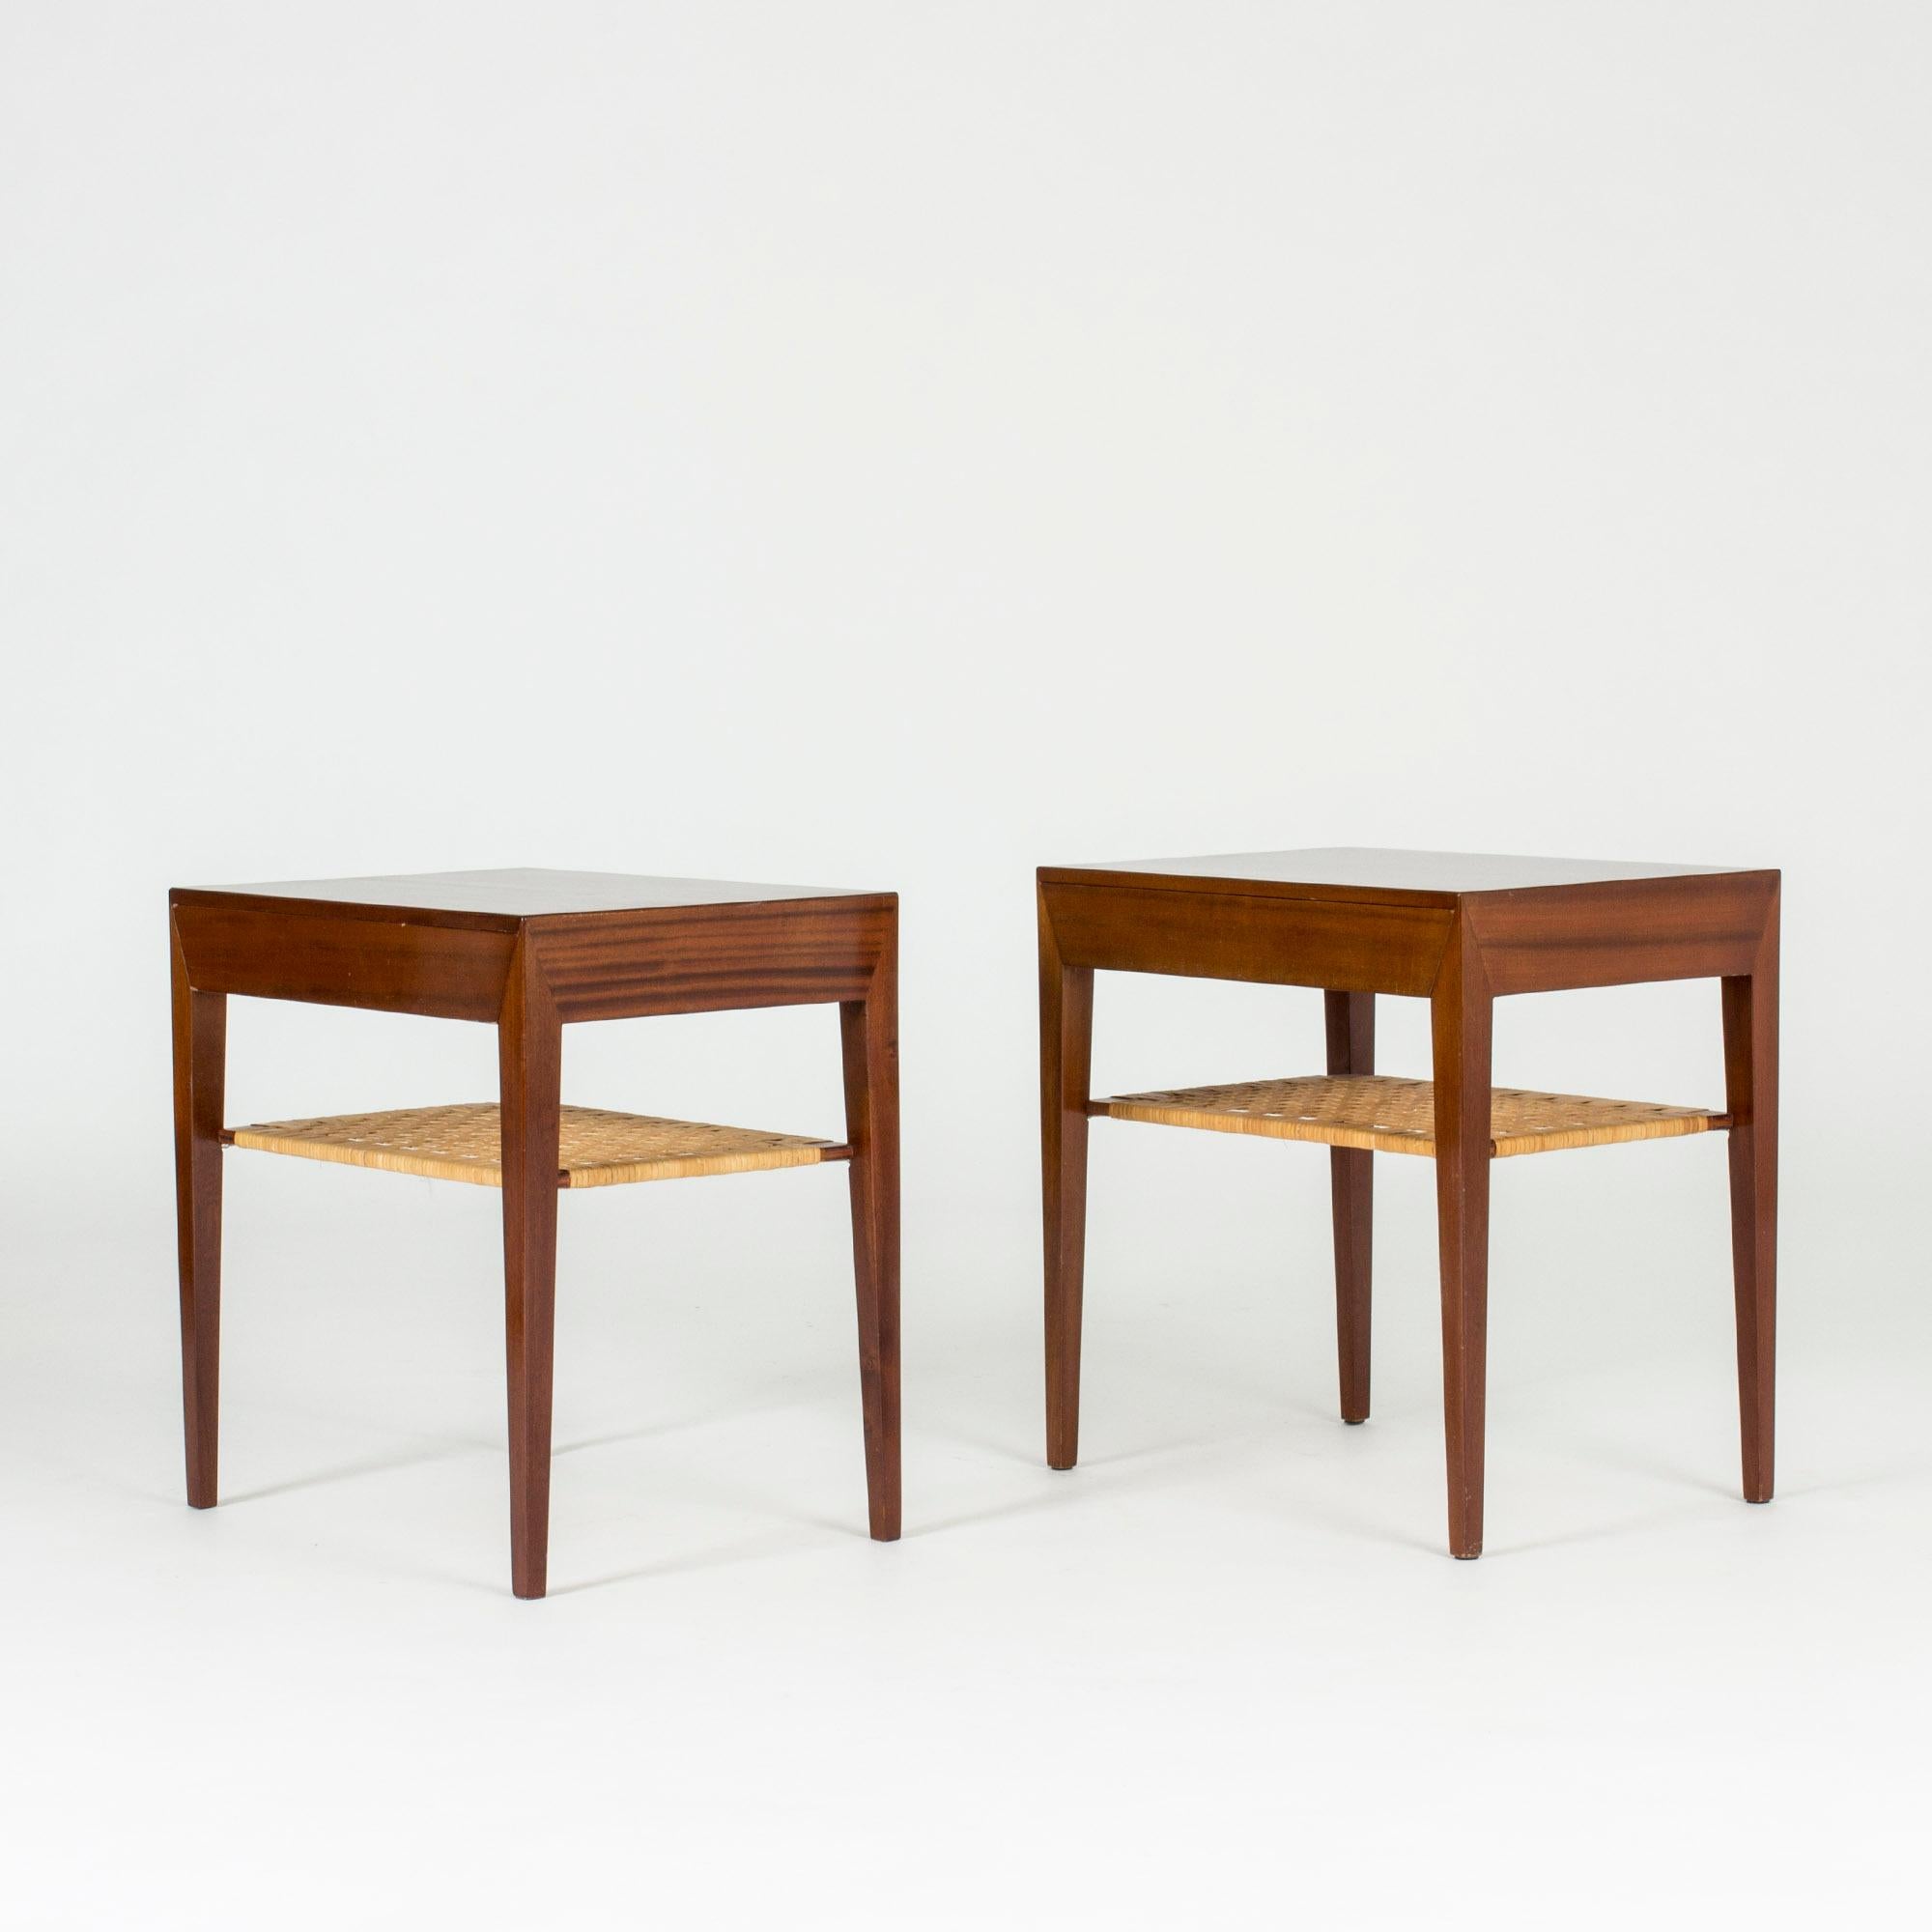 Pair of mahogany bedside tables by Severin Hansen with drawers and rattan shelves under the table tops. Severin Hansen’s characteristic diagonal, seamless joinery at the corners.